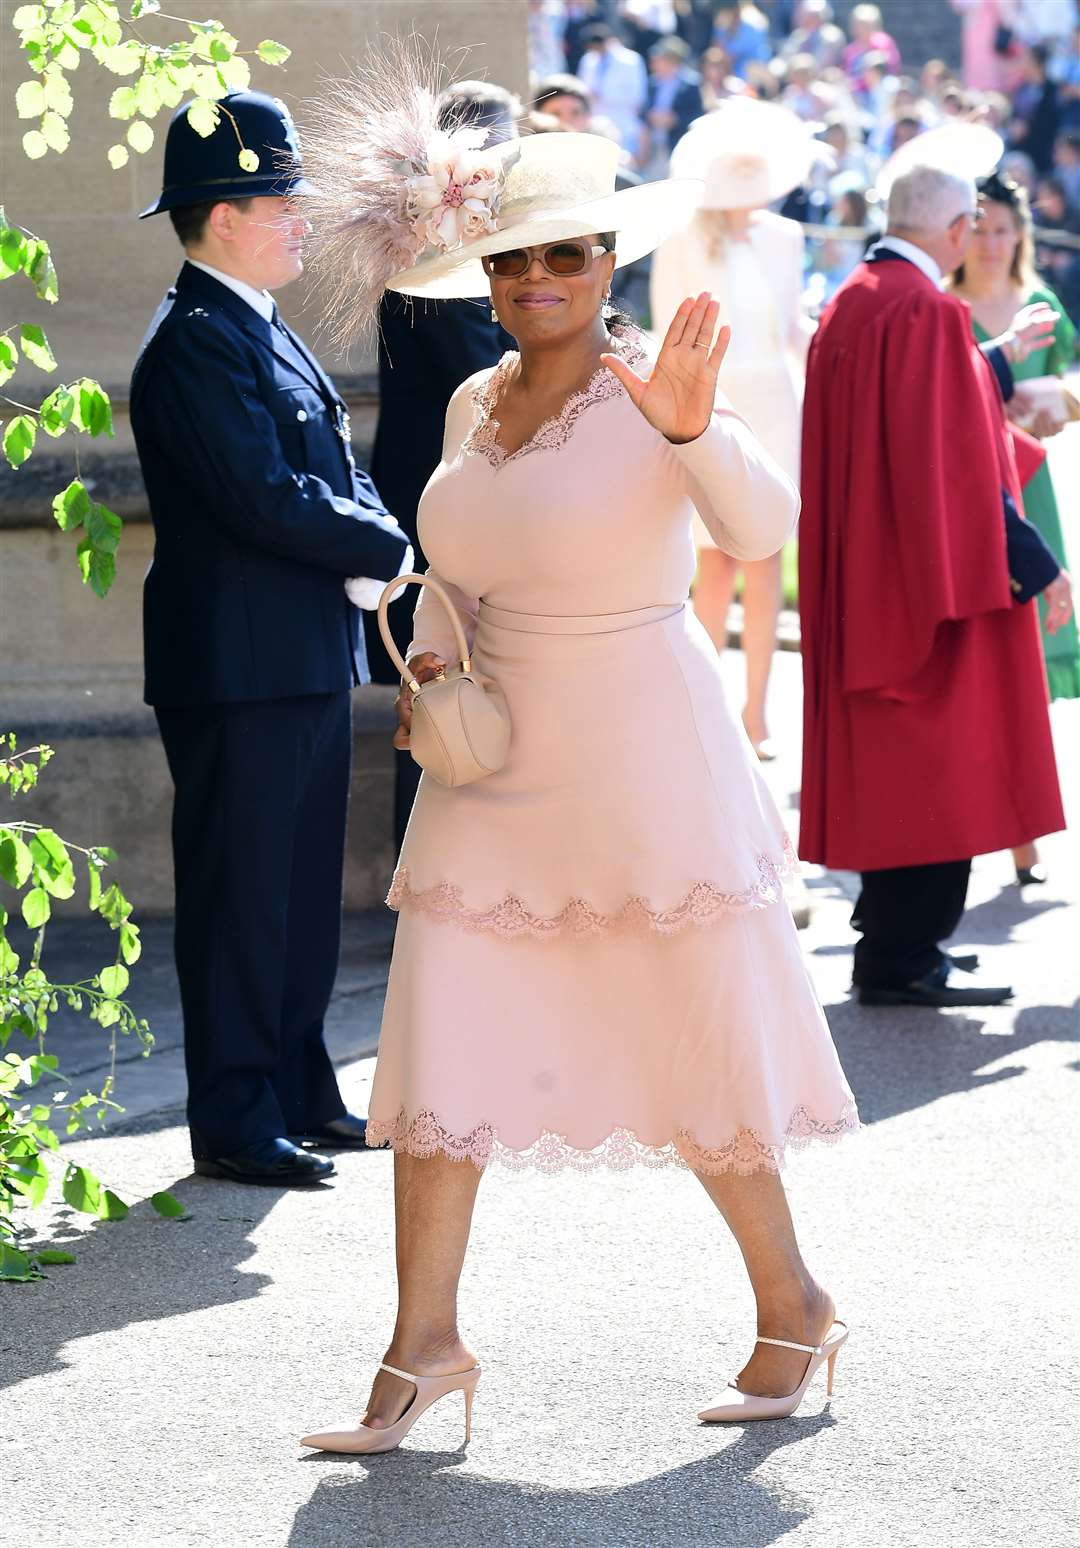 Oprah Winfrey arrives at St George’s Chapel at Windsor Castle for the wedding of Meghan Markle and Prince Harry in 2018 (Ian West/PA)